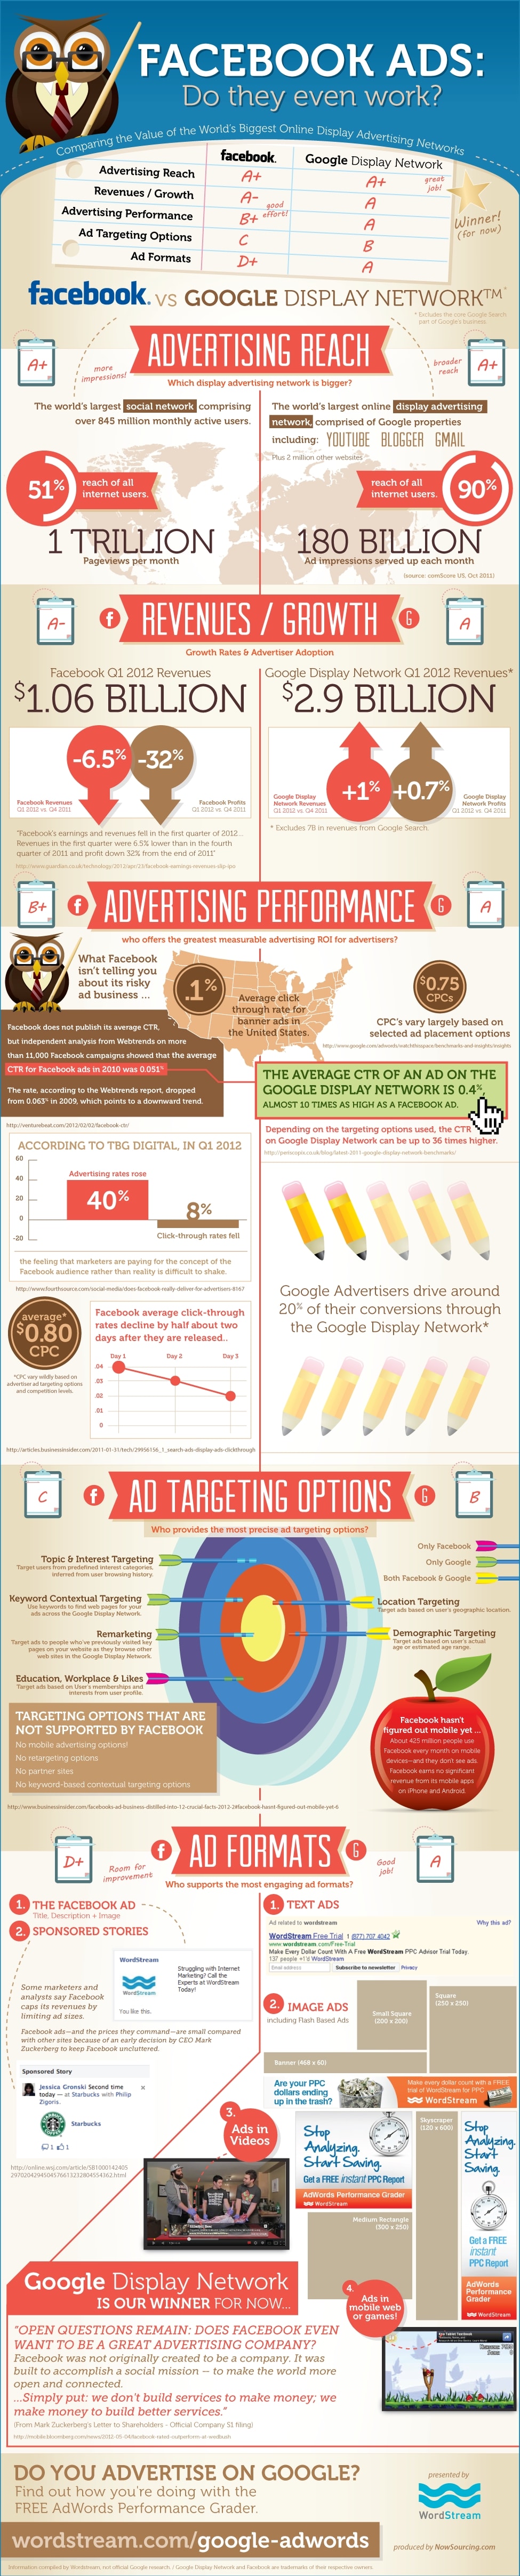 Facebook Ad Performance: Do They Even Work? [Infographic]